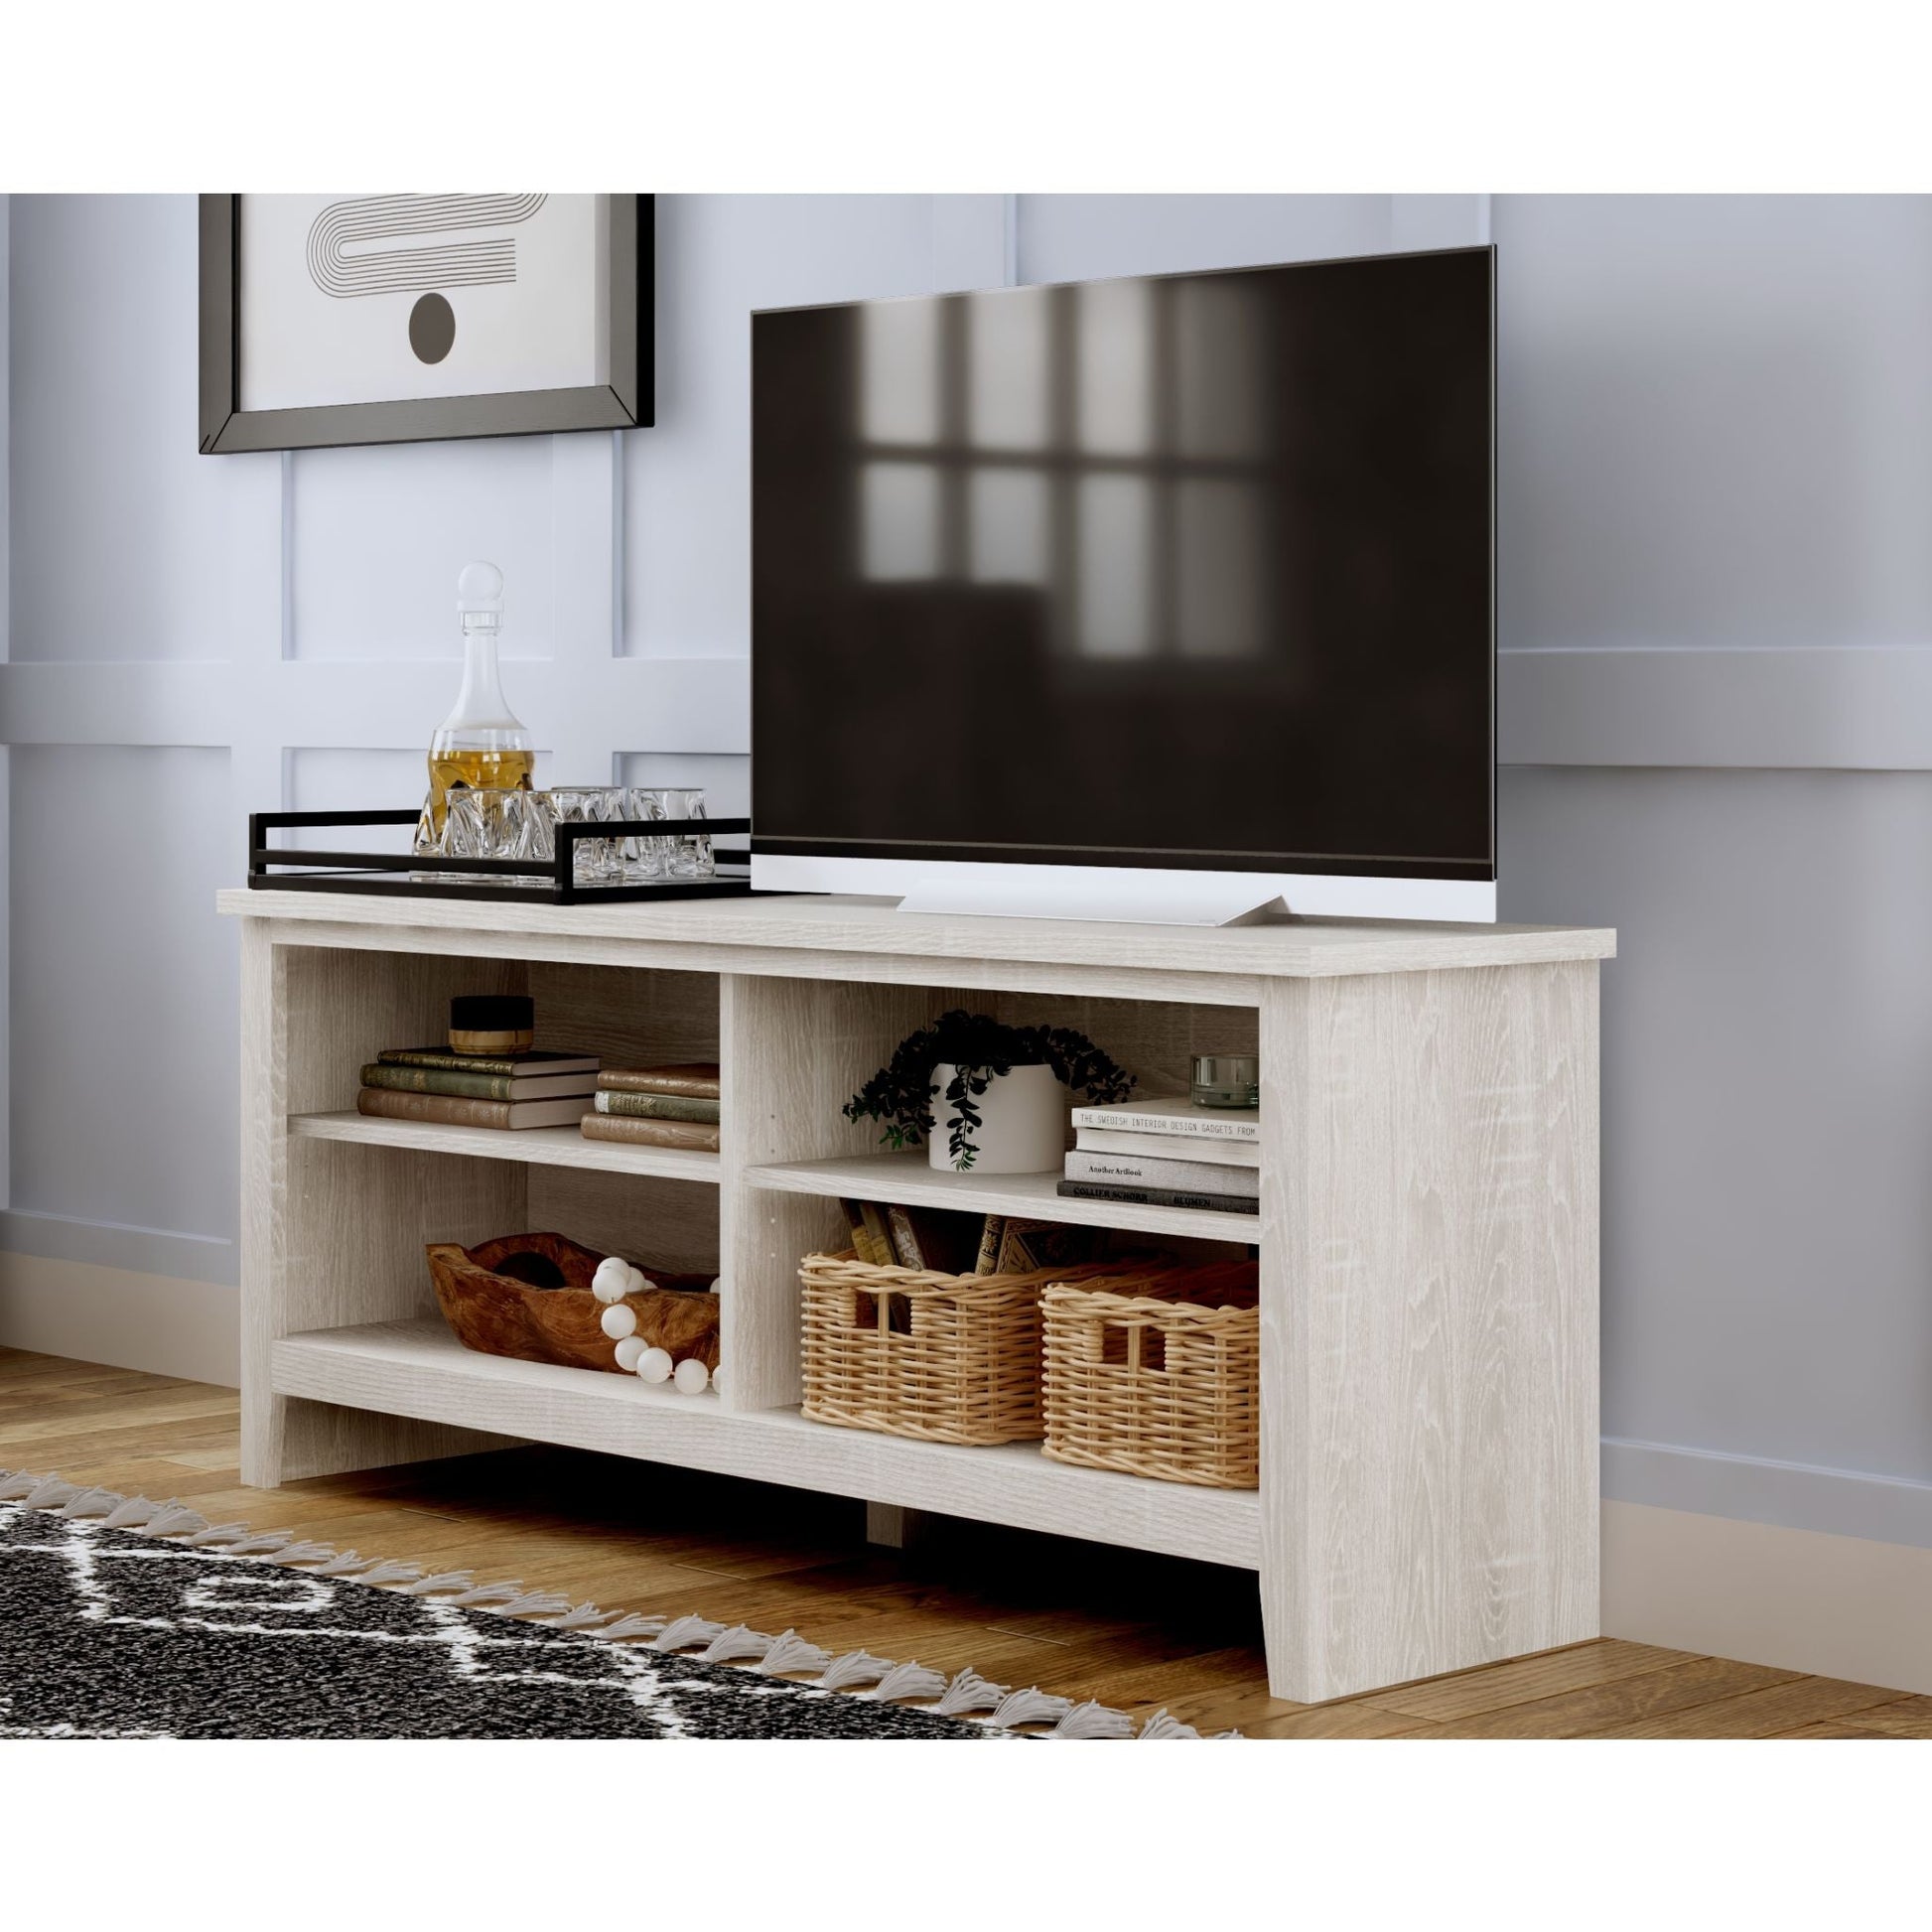 Arlenbry Large TV Stand - Antique White